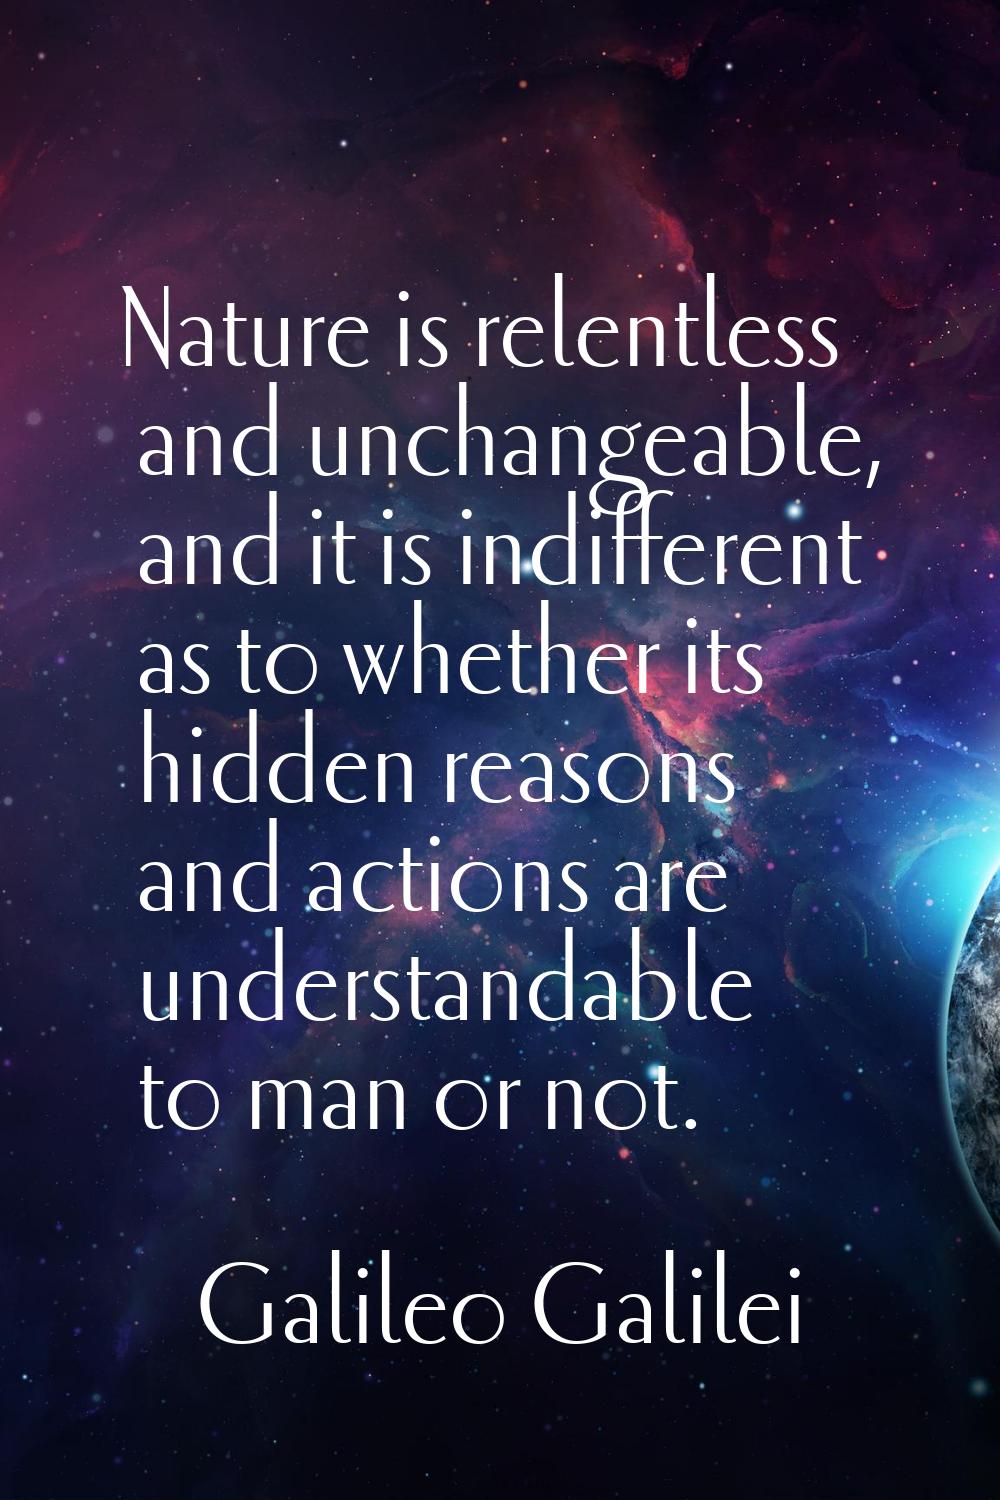 Nature is relentless and unchangeable, and it is indifferent as to whether its hidden reasons and a